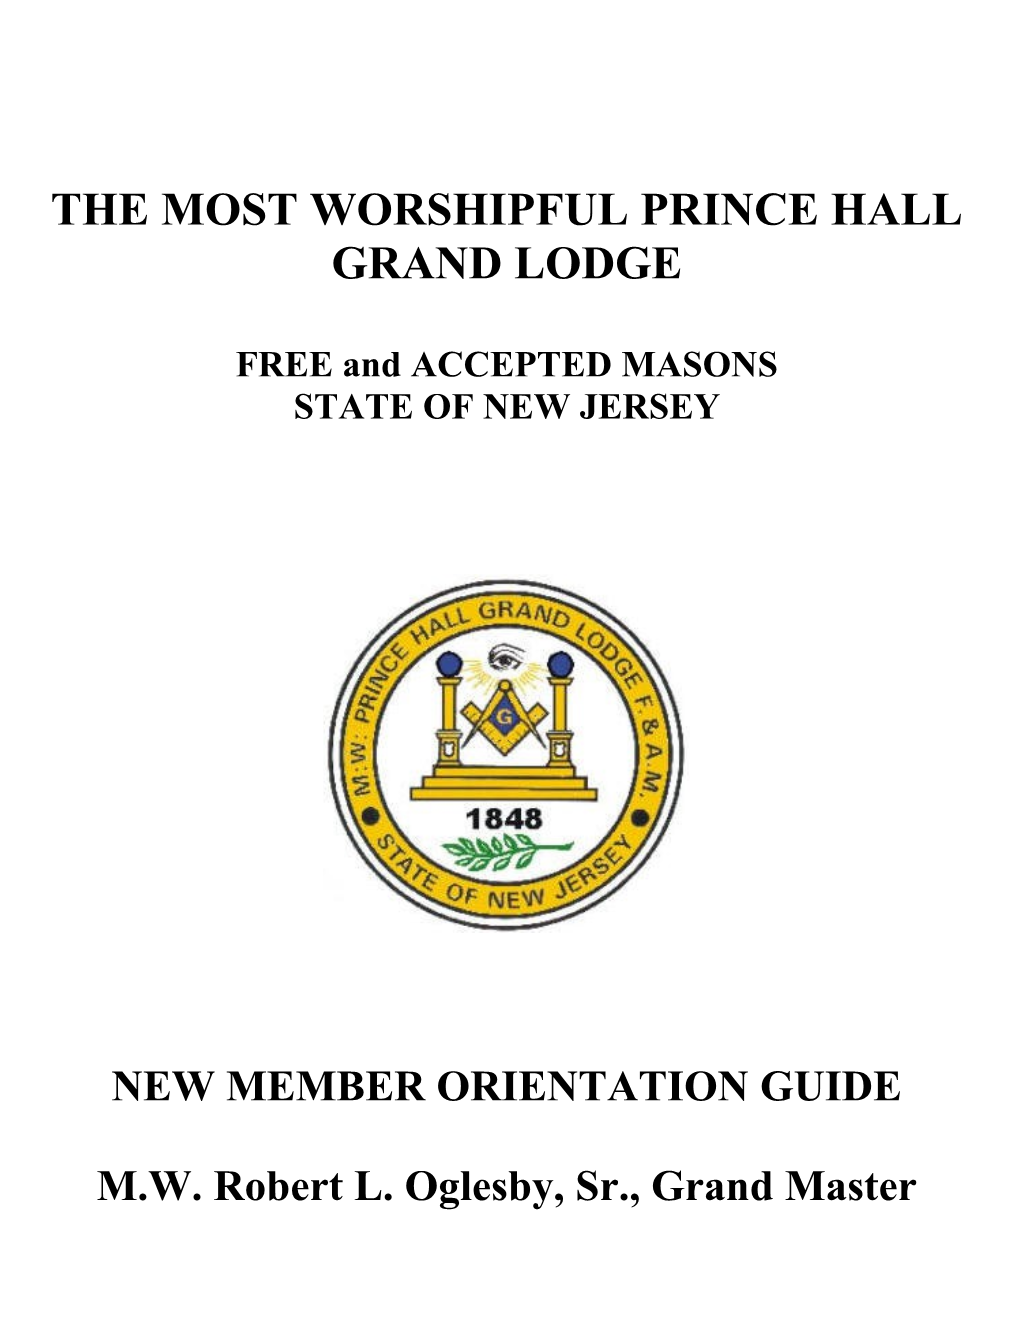 The Most Worshipful Prince Hall Grand Lodge